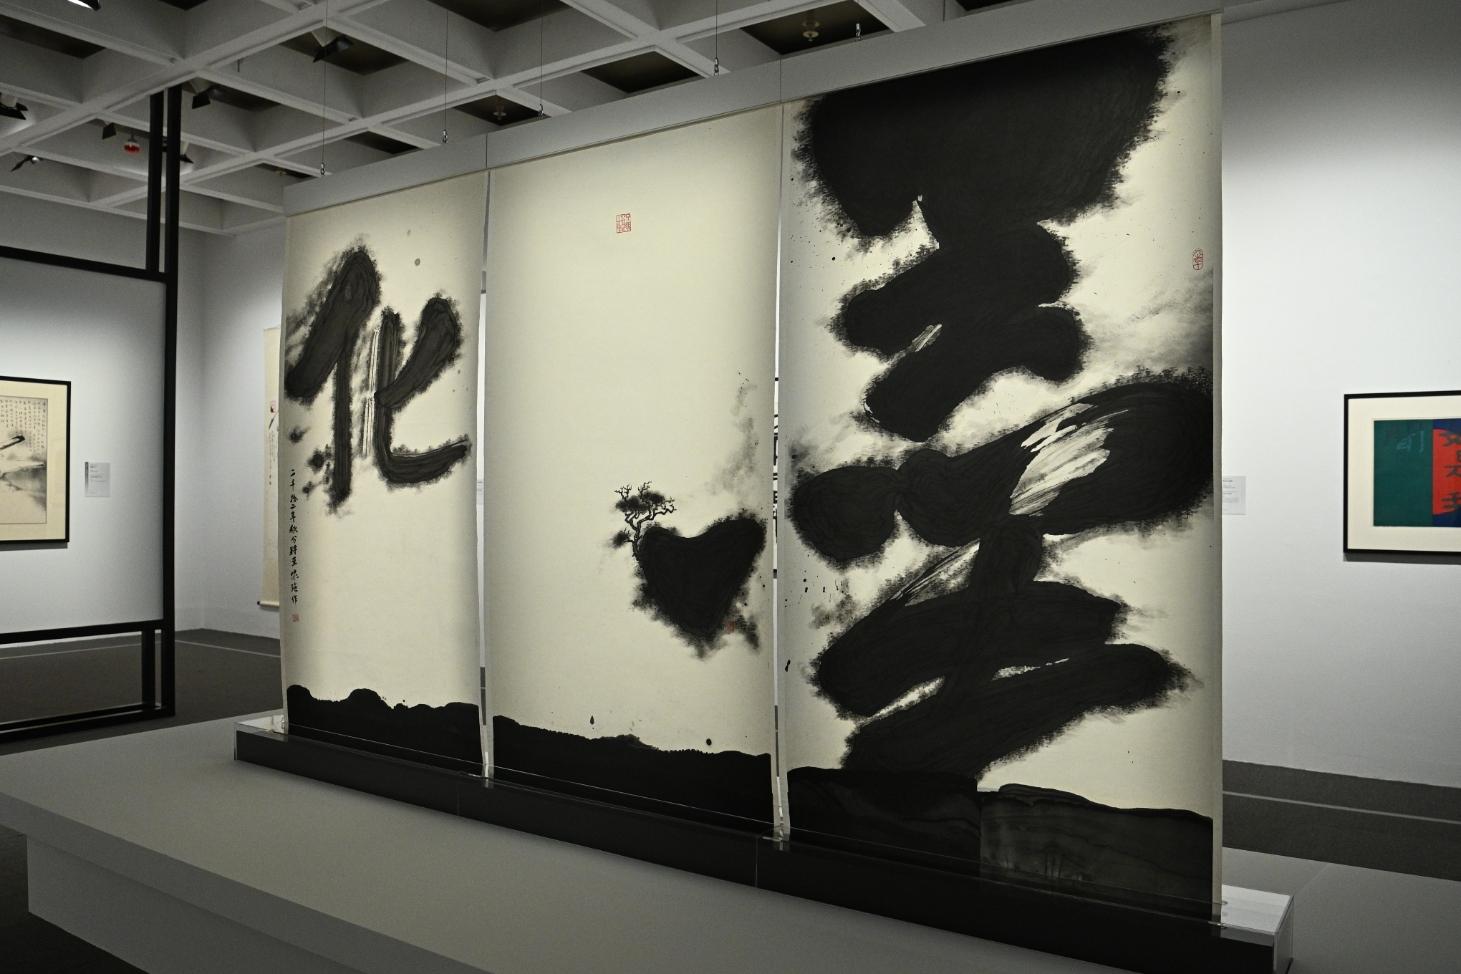 The "City Rhymes: The Melodious Notes of Calligraphy" exhibition will be held from tomorrow (July 22) at the Hong Kong Museum of Art. Photo shows Kan Tai-keung's "Rippling".